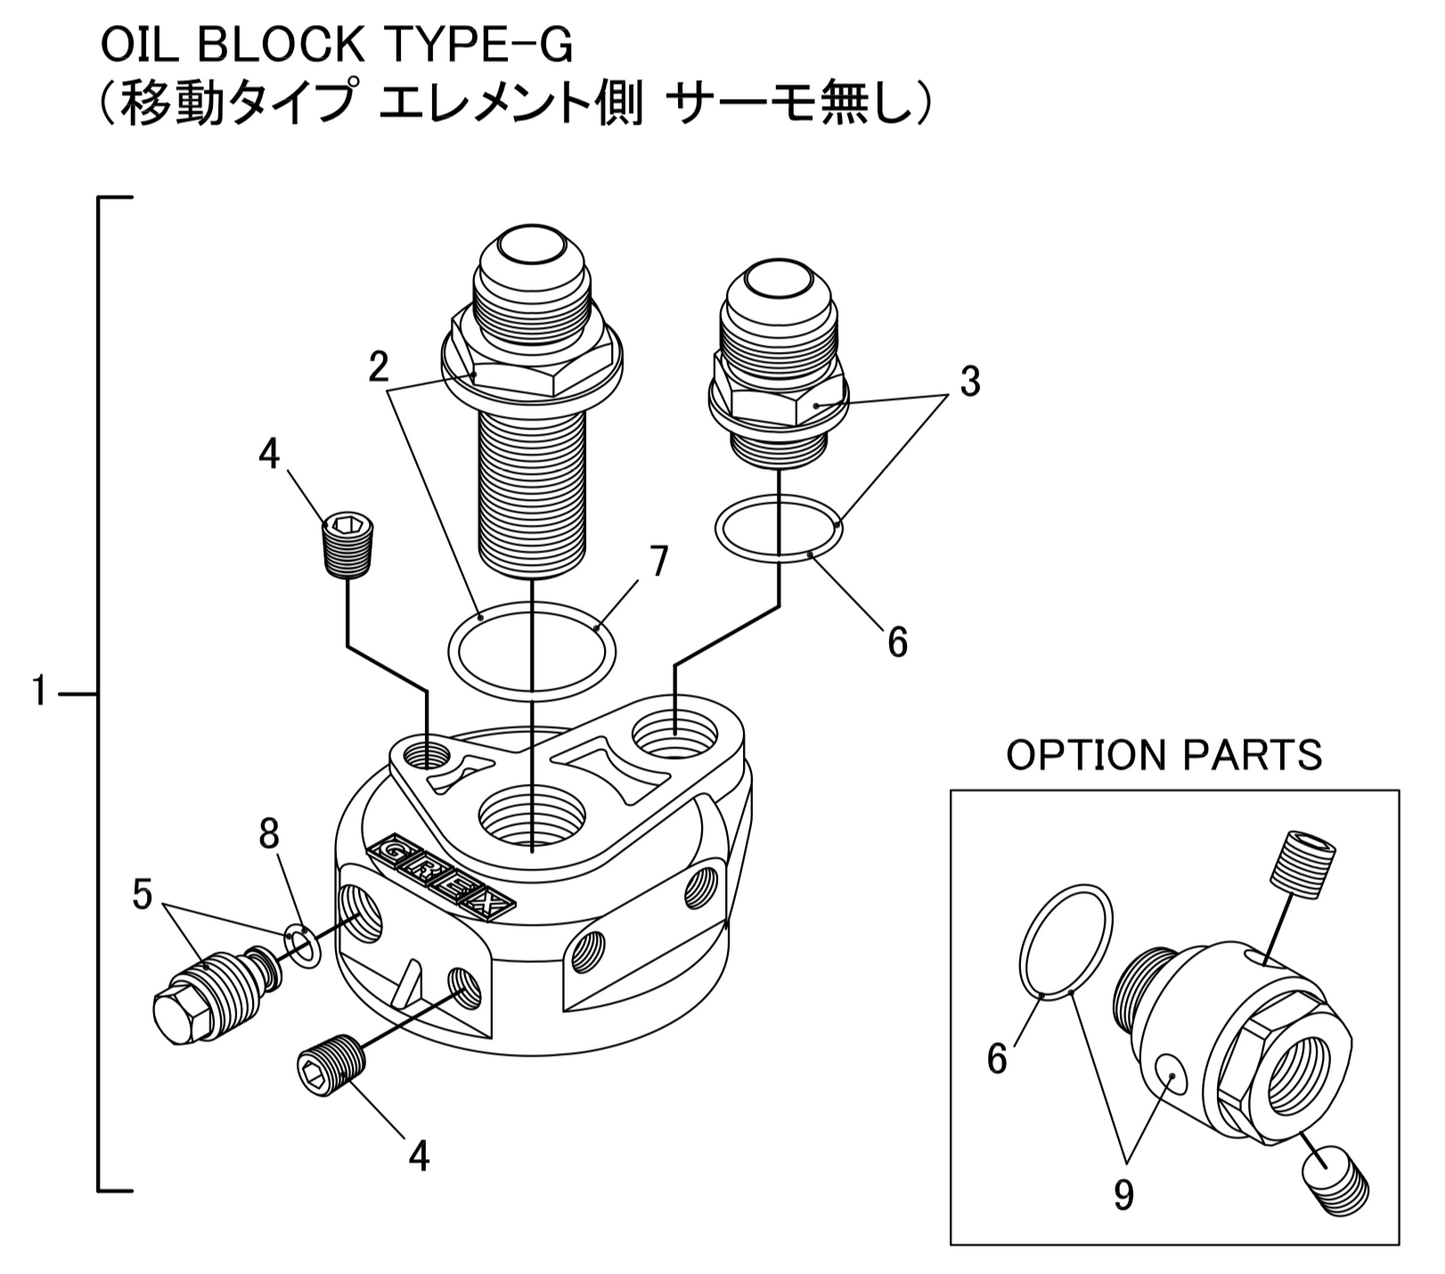 GReddy TRUST Japan OIL BLOCK TYPE-G (MU MOVEMENT TYPE ELEMENT SIDE THERMO) FOR 12401144